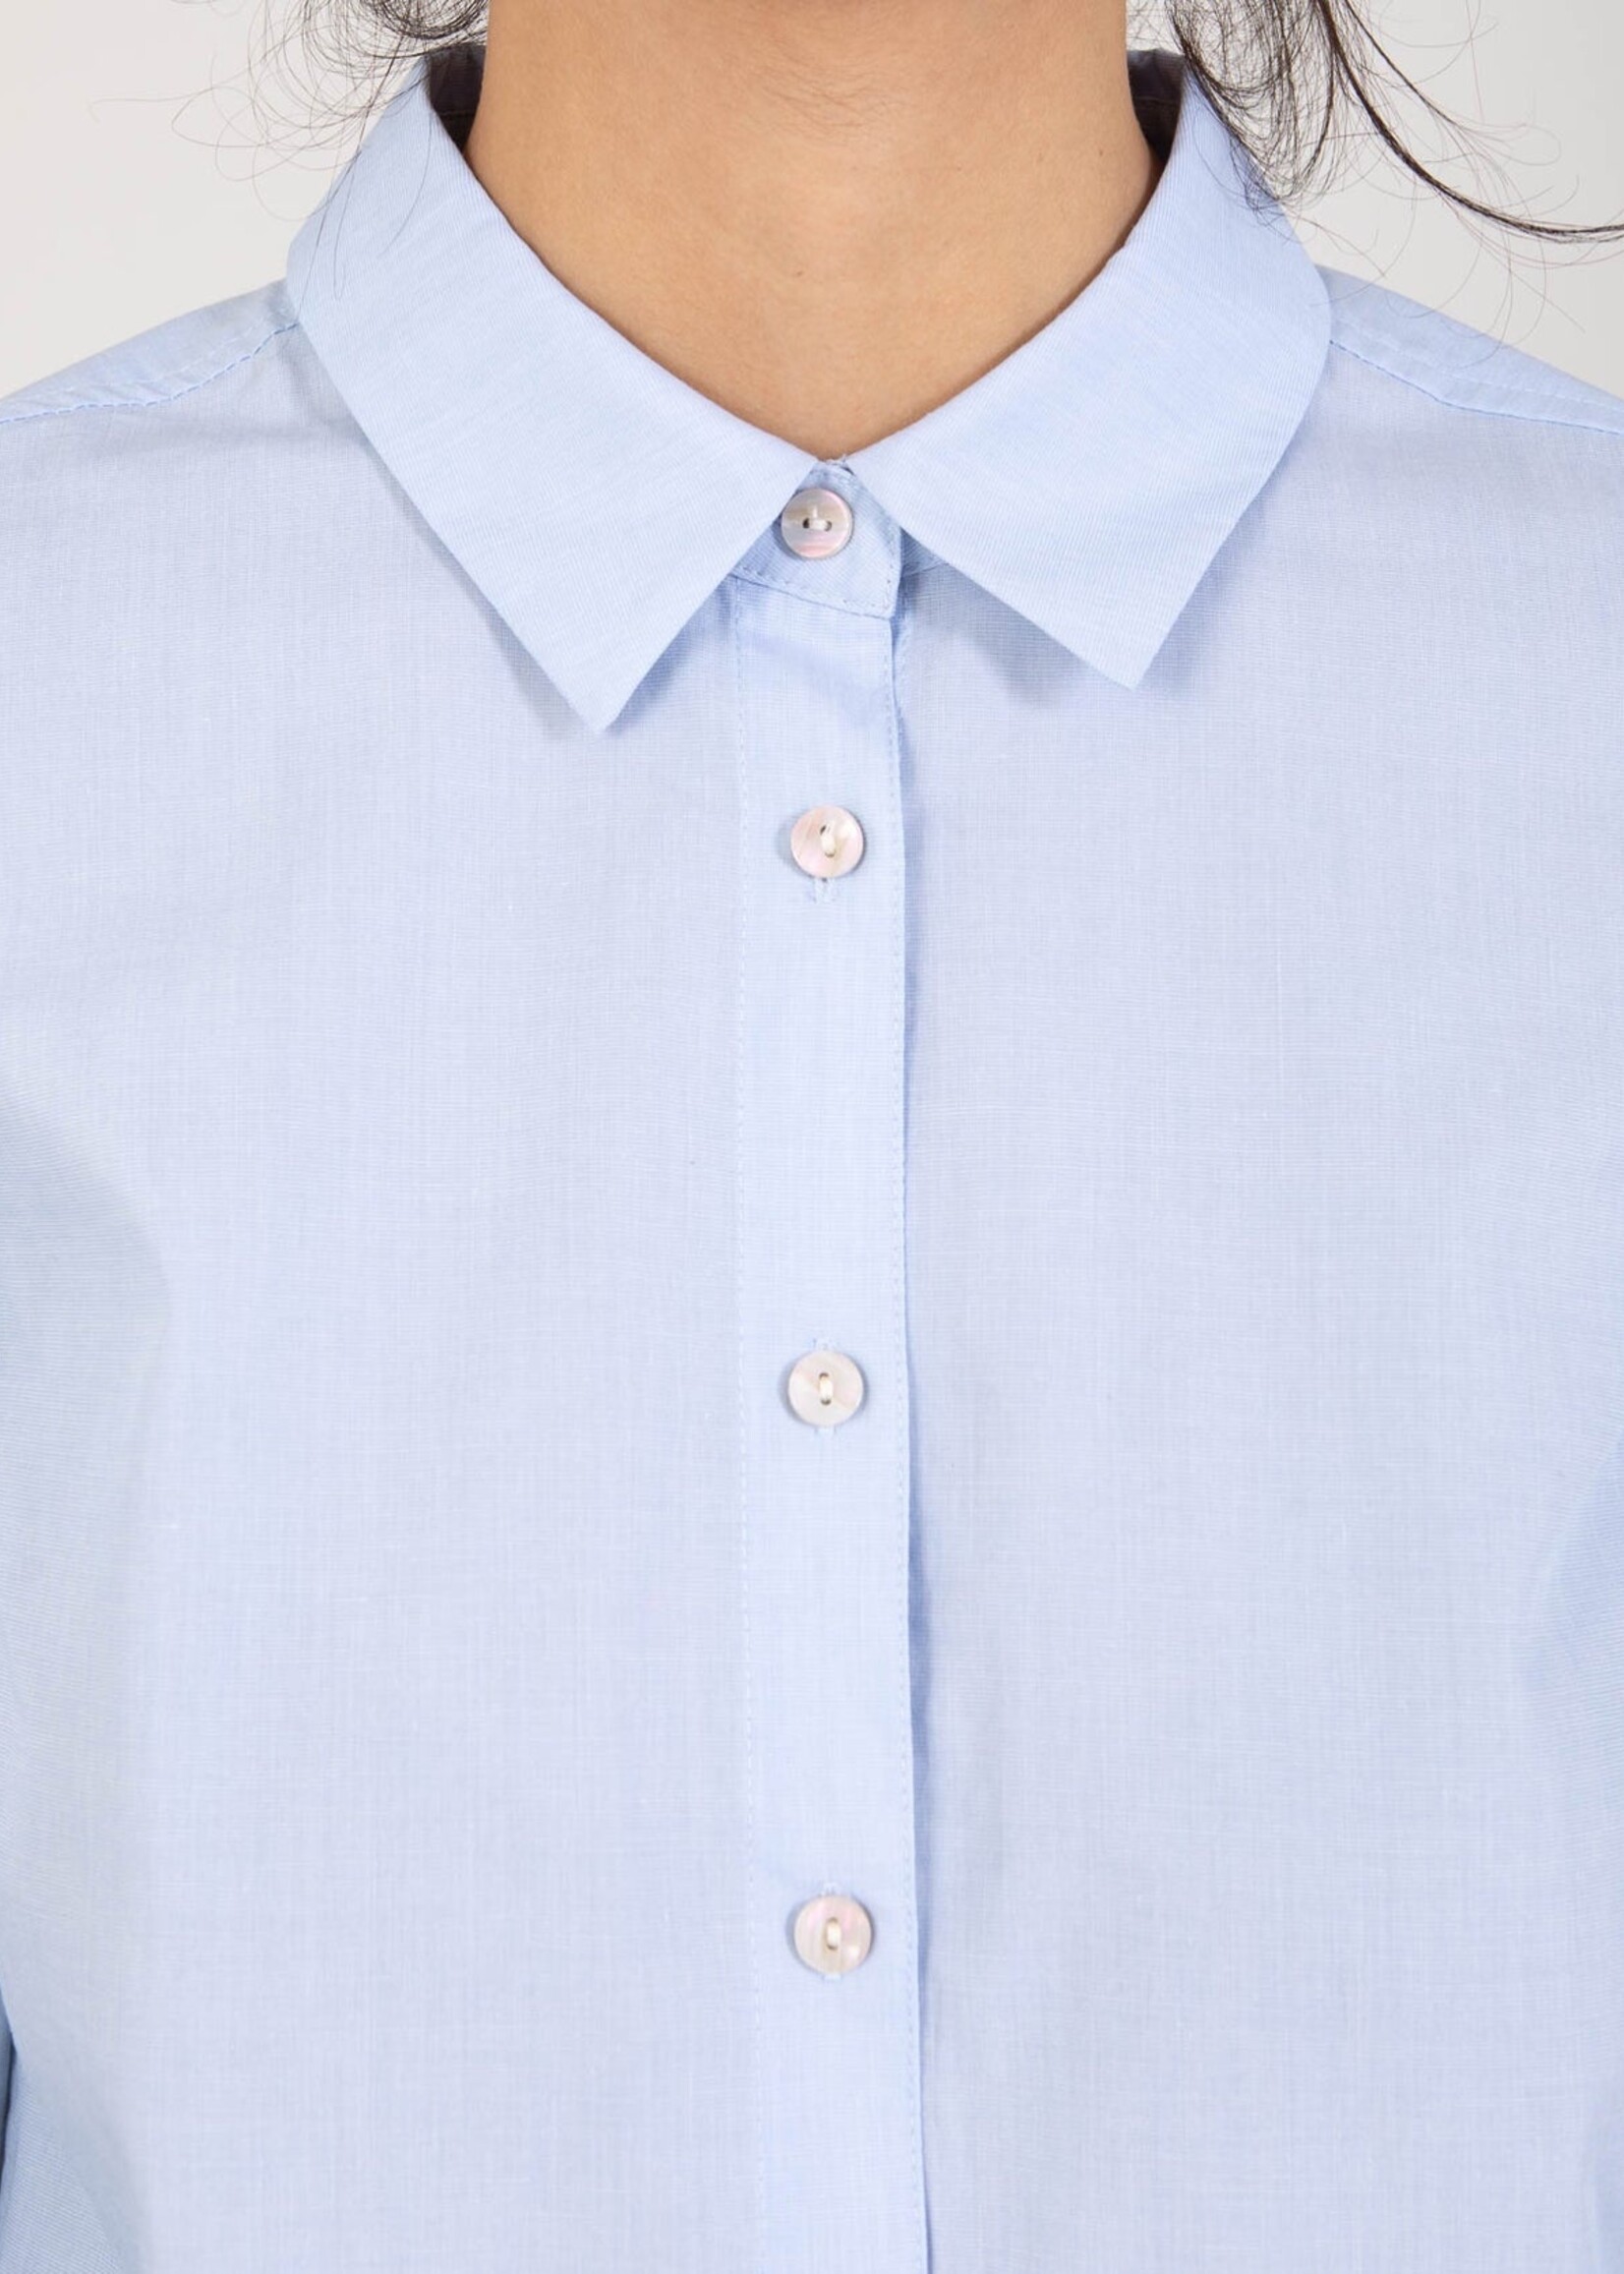 COSTER Oversize Oxford shirt